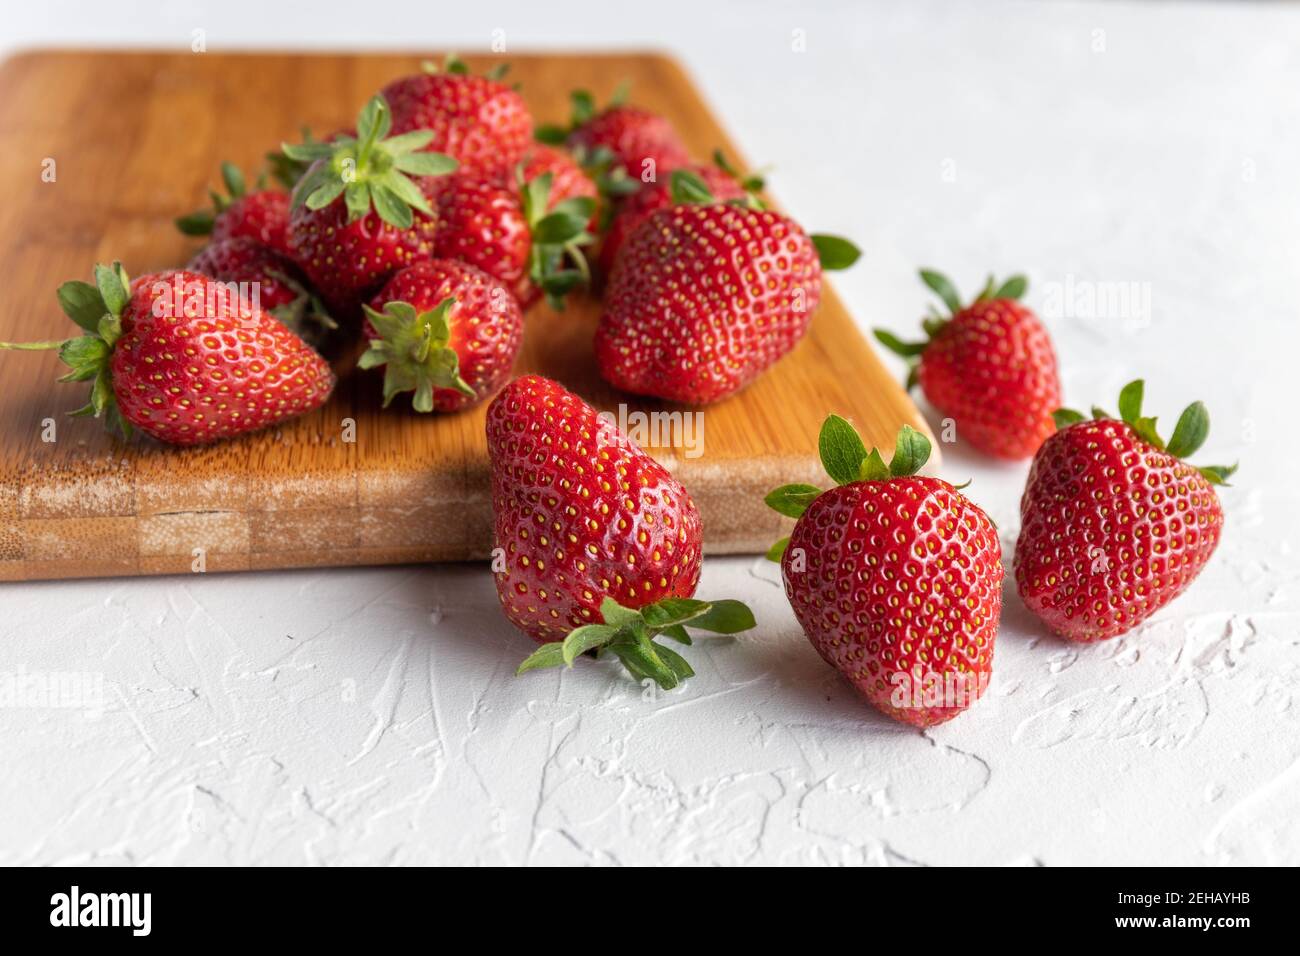 Red, Ripe Strawberries Fresh From the Garden on Wooden Cutting Board Stock Photo